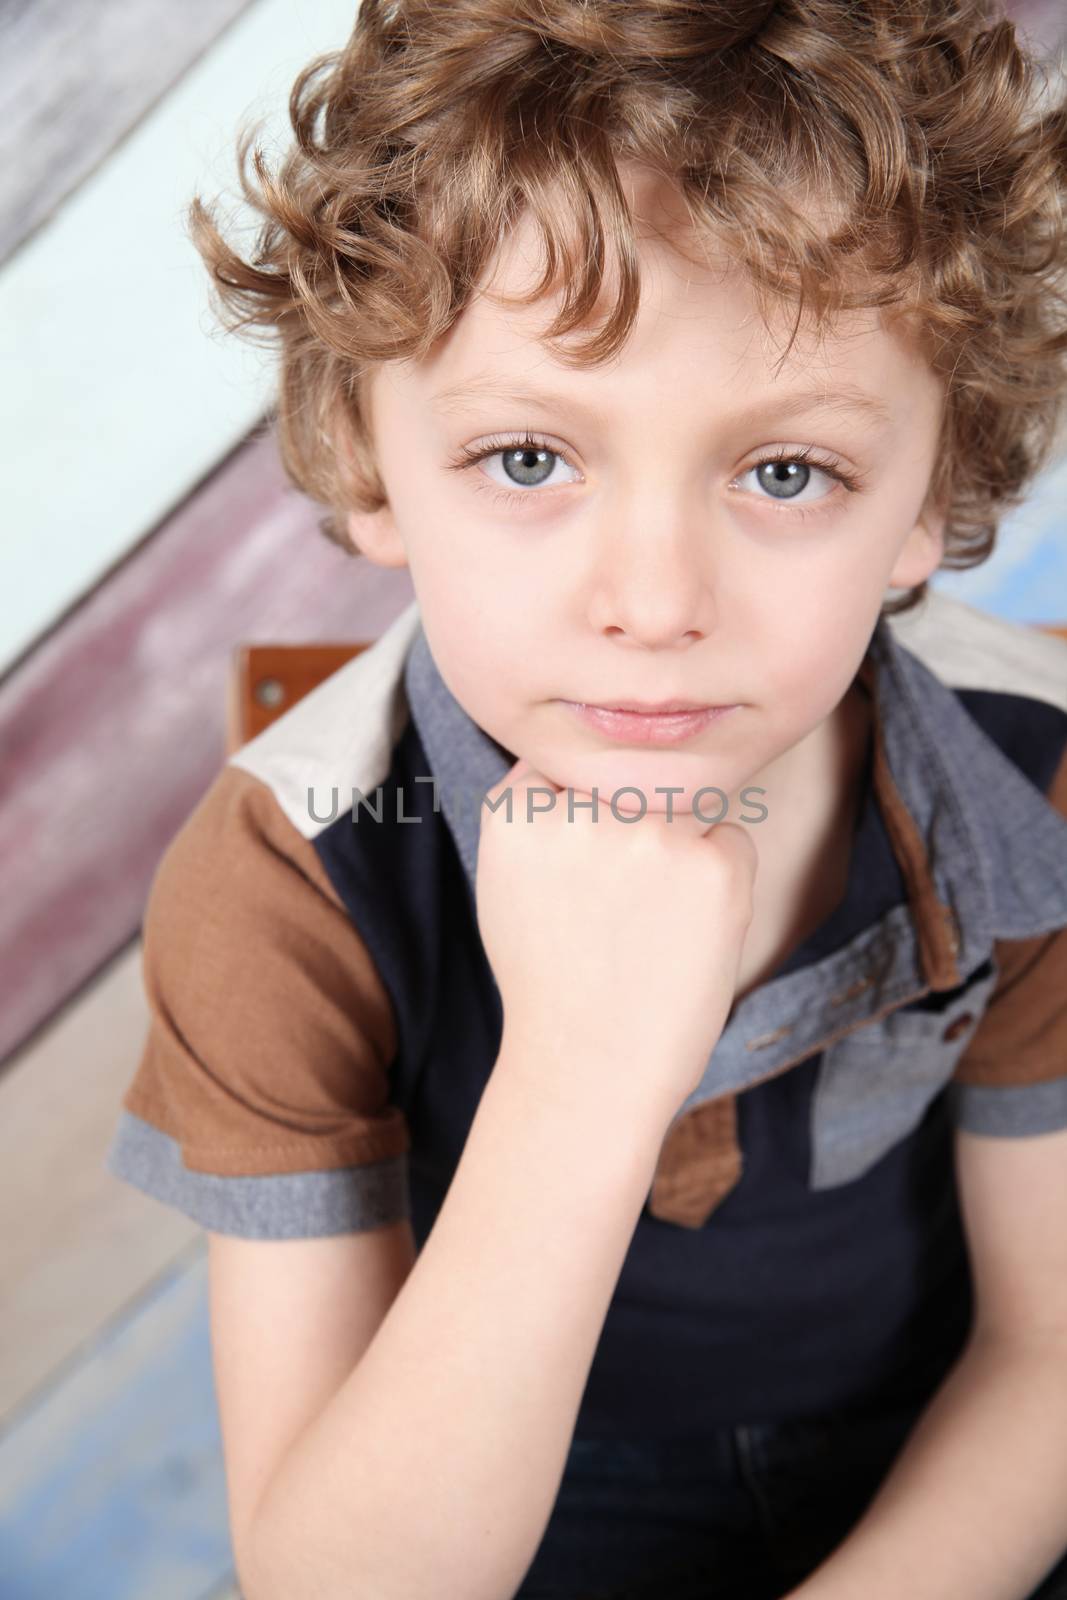 Young boy with curly blonde hair and blue shirt